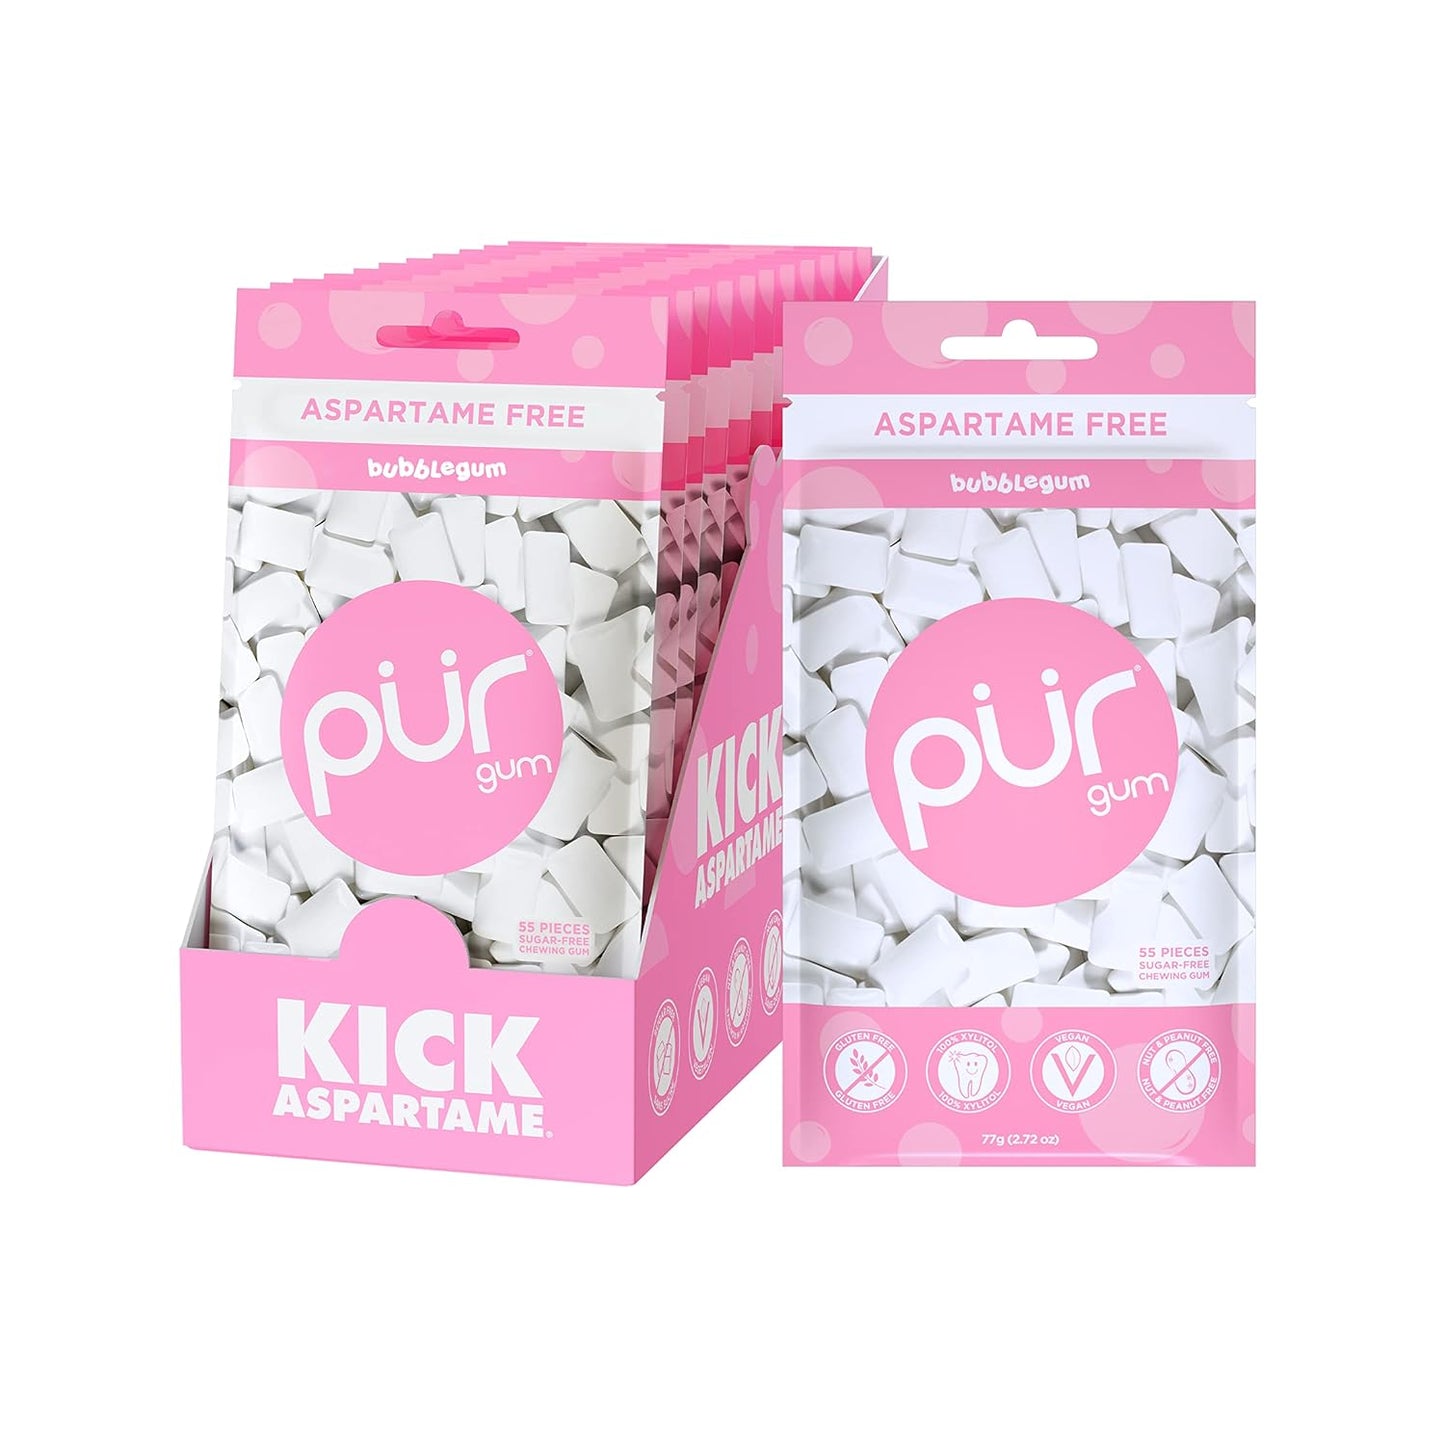 PUR Gum | Aspartame Free Chewing Gum | 100% Xylitol | Sugar Free, Vegan, Gluten Free & Keto Friendly | Natural Spearmint Flavored Gum, 55 Pieces (Pack of 1) - Premium chewing gum from Concordia Style Boutique - Just $9.27! Shop now at Concordia Style Boutique